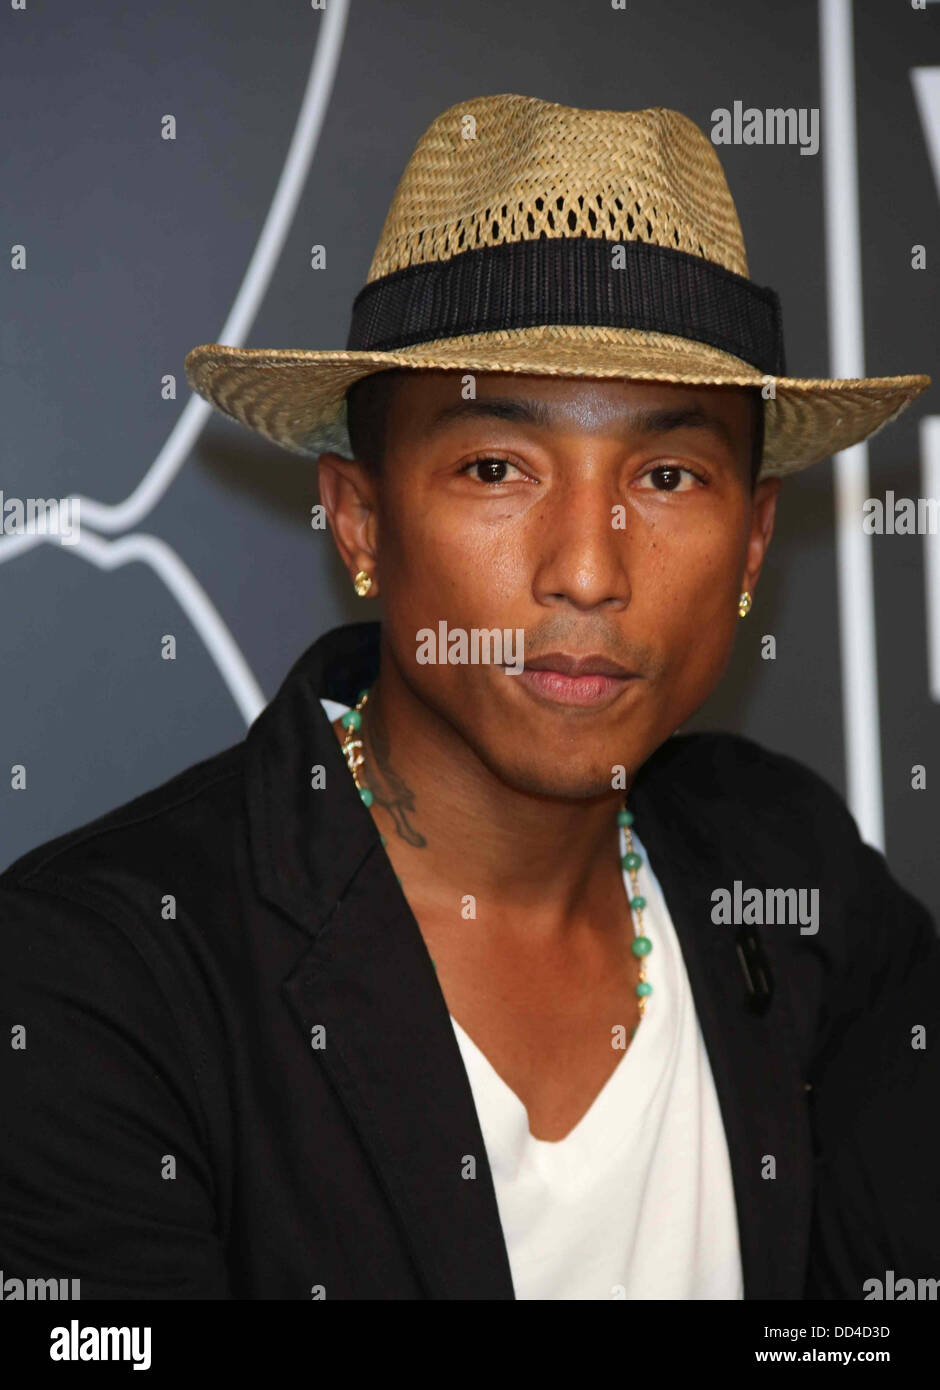 Brooklyn, New York, USA. 25th Aug, 2013. US producer and songwriter Pharrell Williams arrives on the red carpet for the MTV Video Music Awards at the Barclays Center in Brooklyn, New York, USA, 25 August 2013. Photo: Hubert Boesl/dpa/Alamy Live News Stock Photo